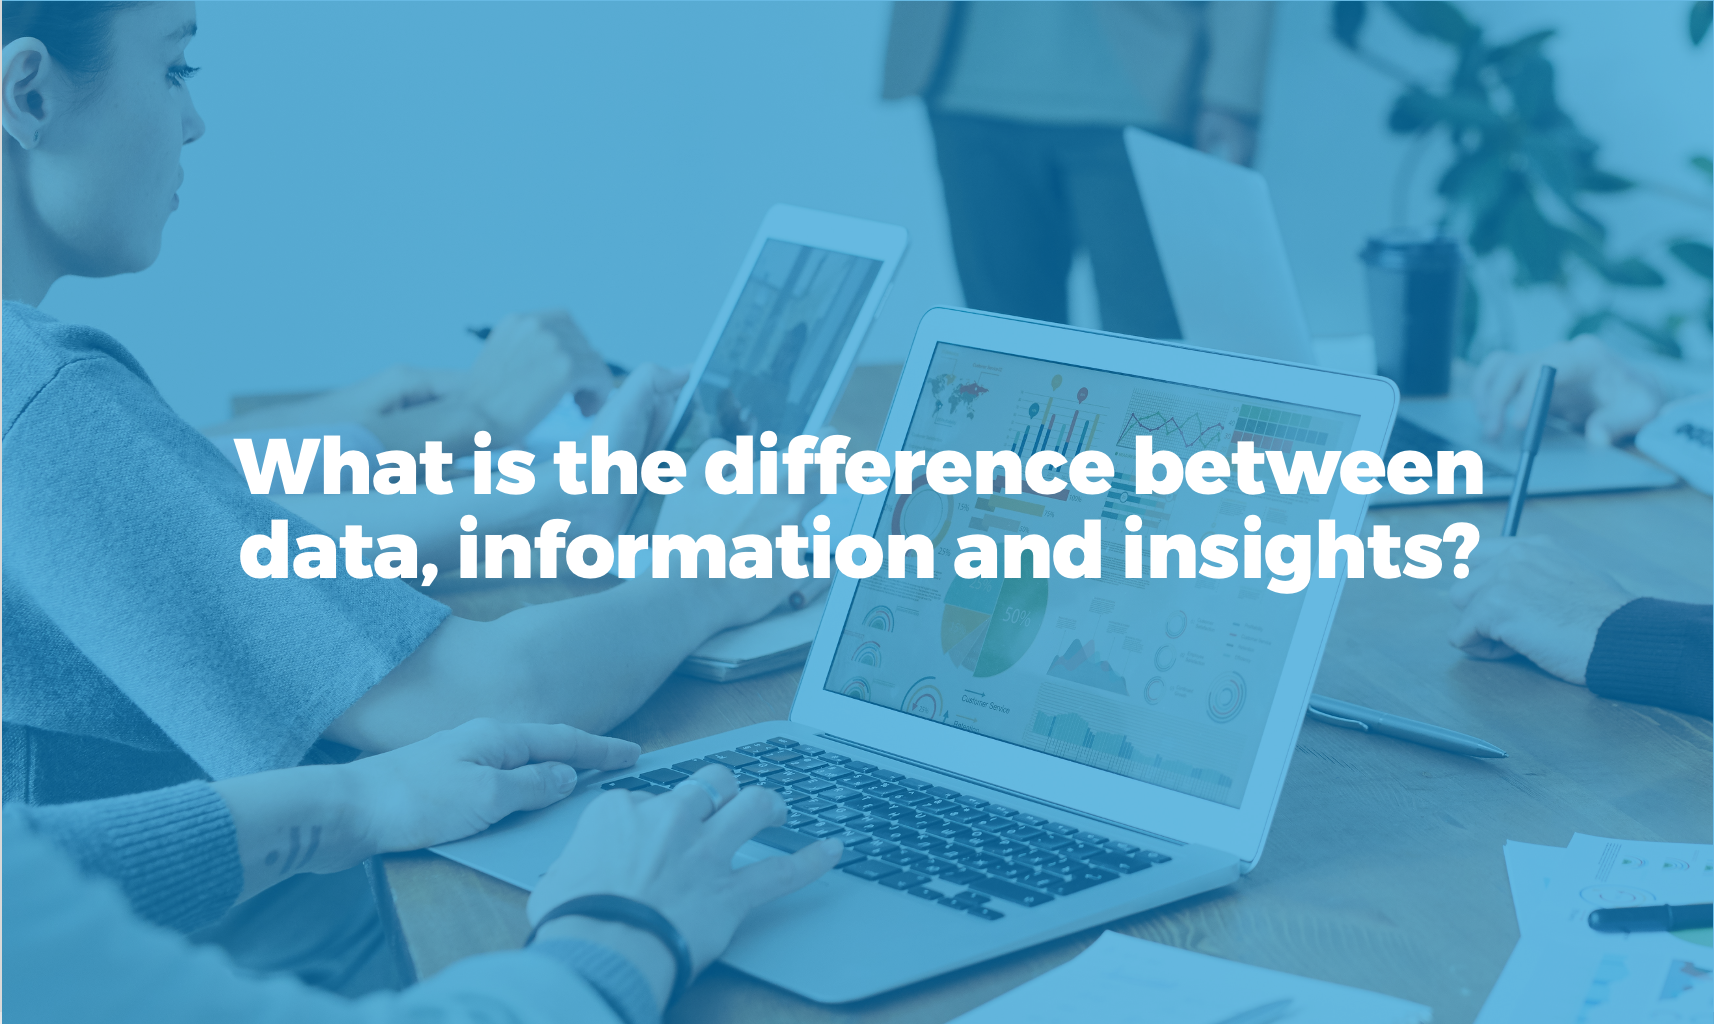 The difference between data, information and insights